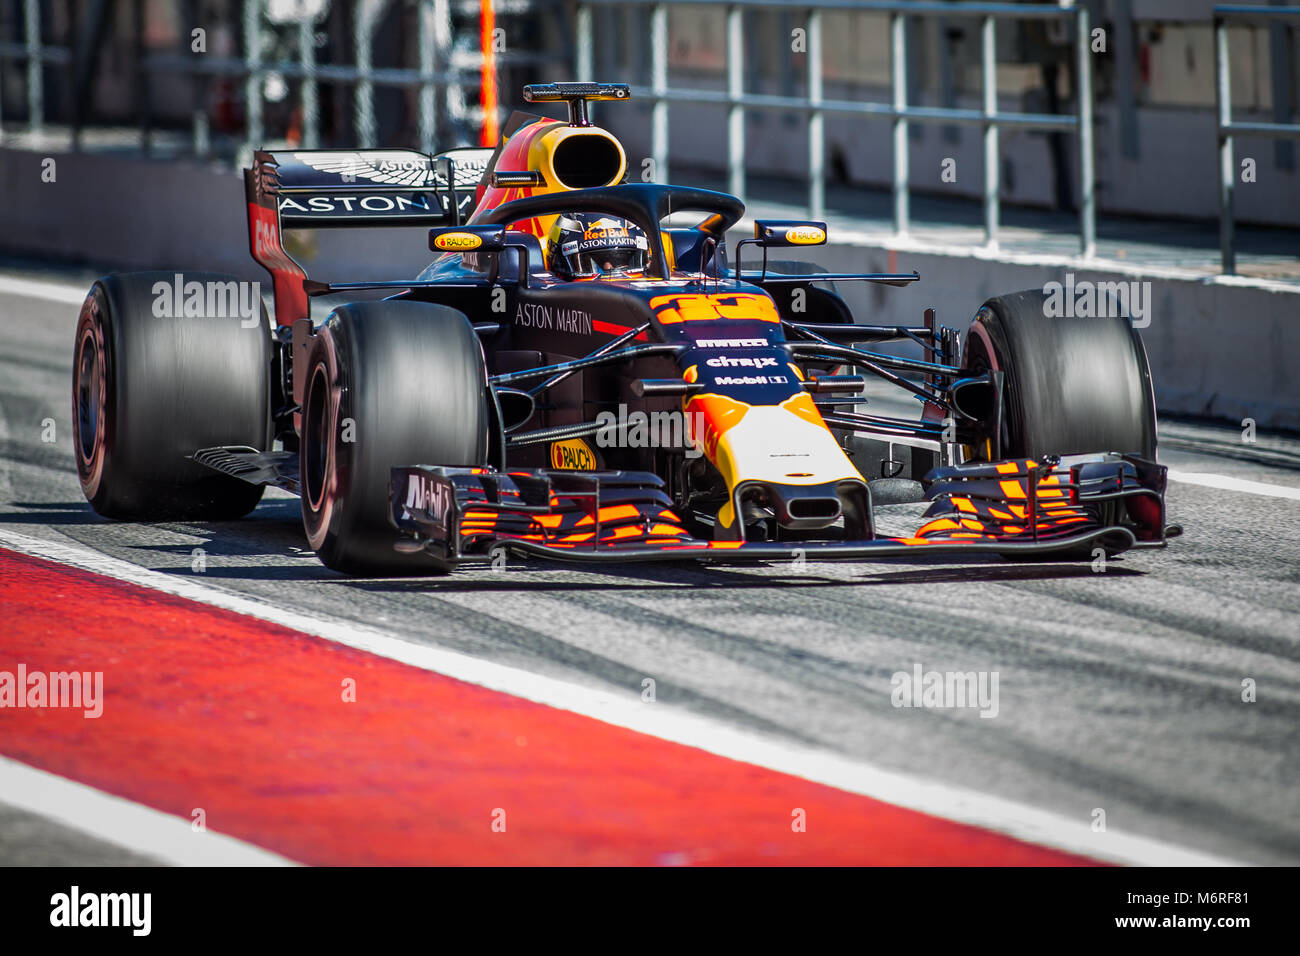 Montmelo, Catalonia, Spain. 6th Mar, 2018. Ricciardo, Red Bull F1 Team's driver seen during day 1 of the second week of the F1 test days at Barcelona-Catalunya Circuit. Credit:  MA 4846.jpg/SOPA Images/ZUMA Wire/Alamy Live News Stock Photo